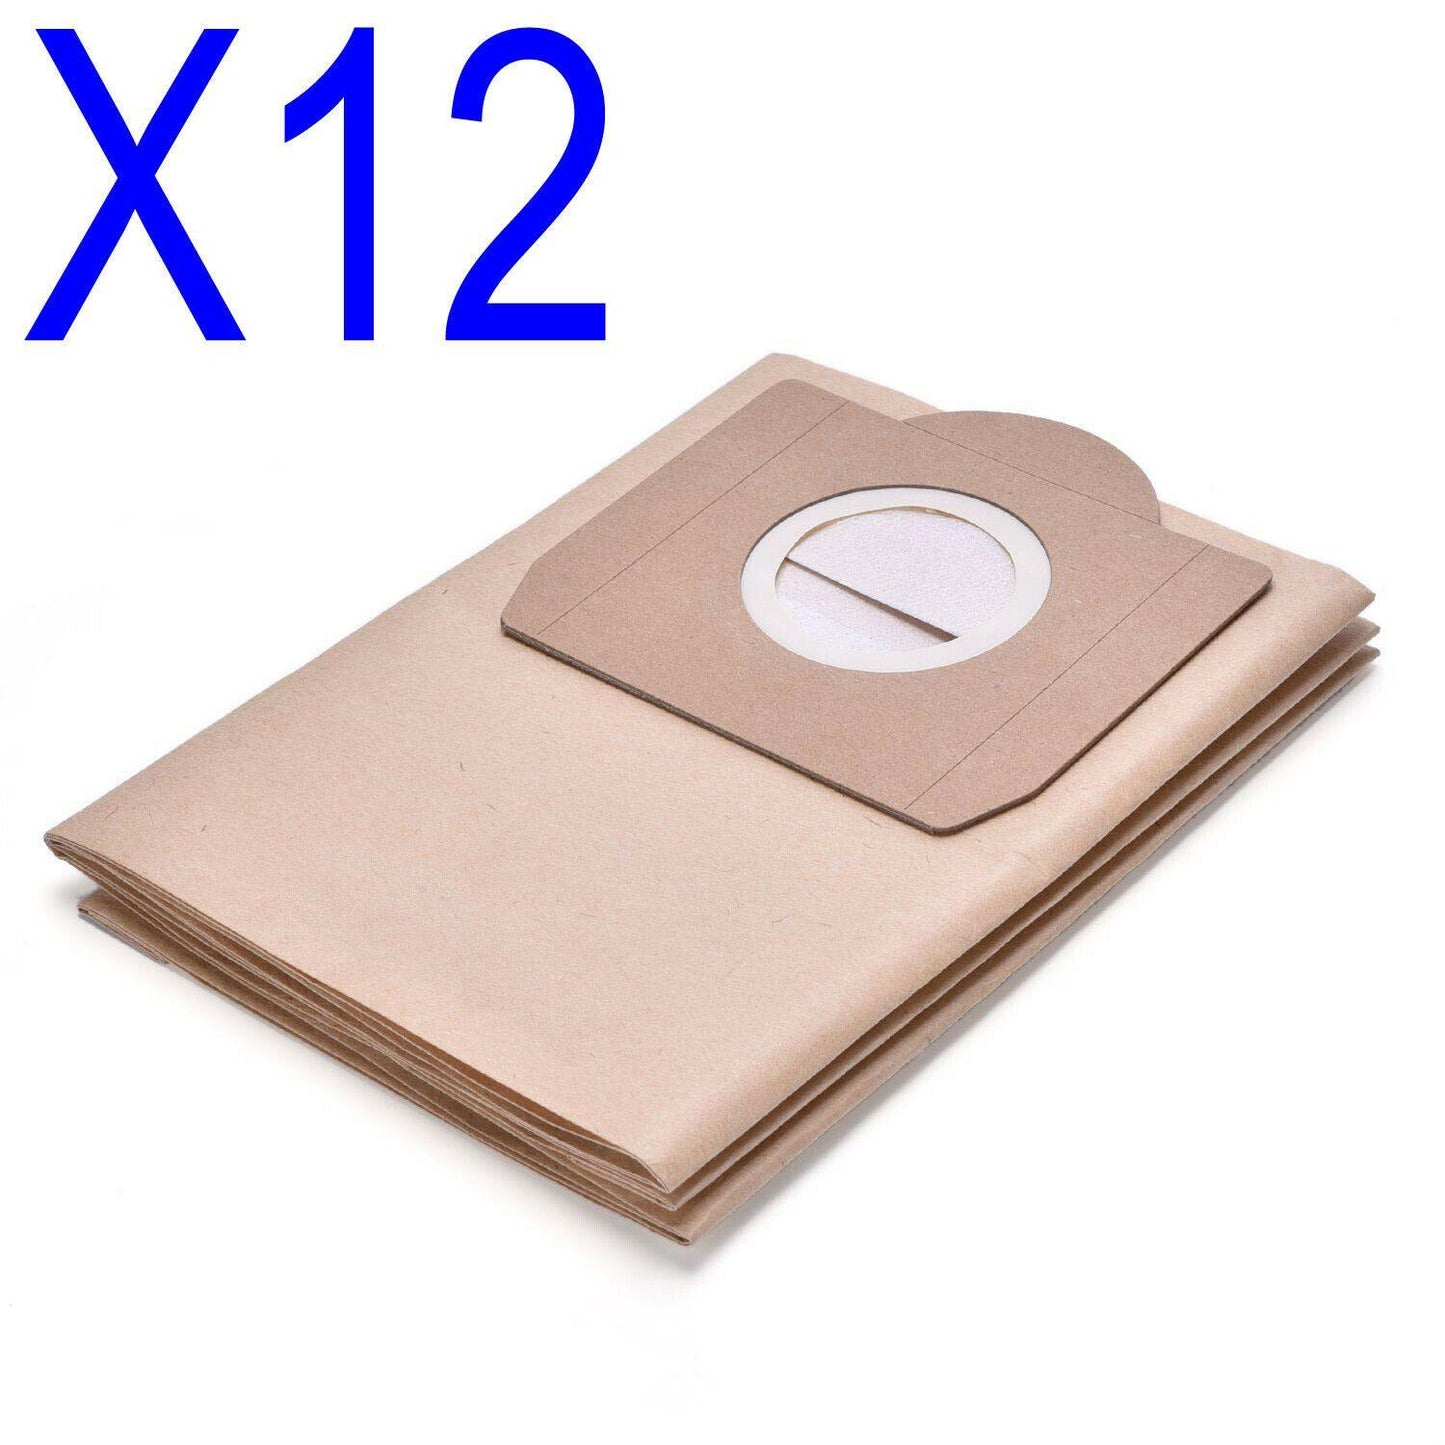 12X Vacuum Paper Bags for Karcher 6.959-130.0 WD 3 MV 3 A2201 A2204 A2504 Sparesbarn